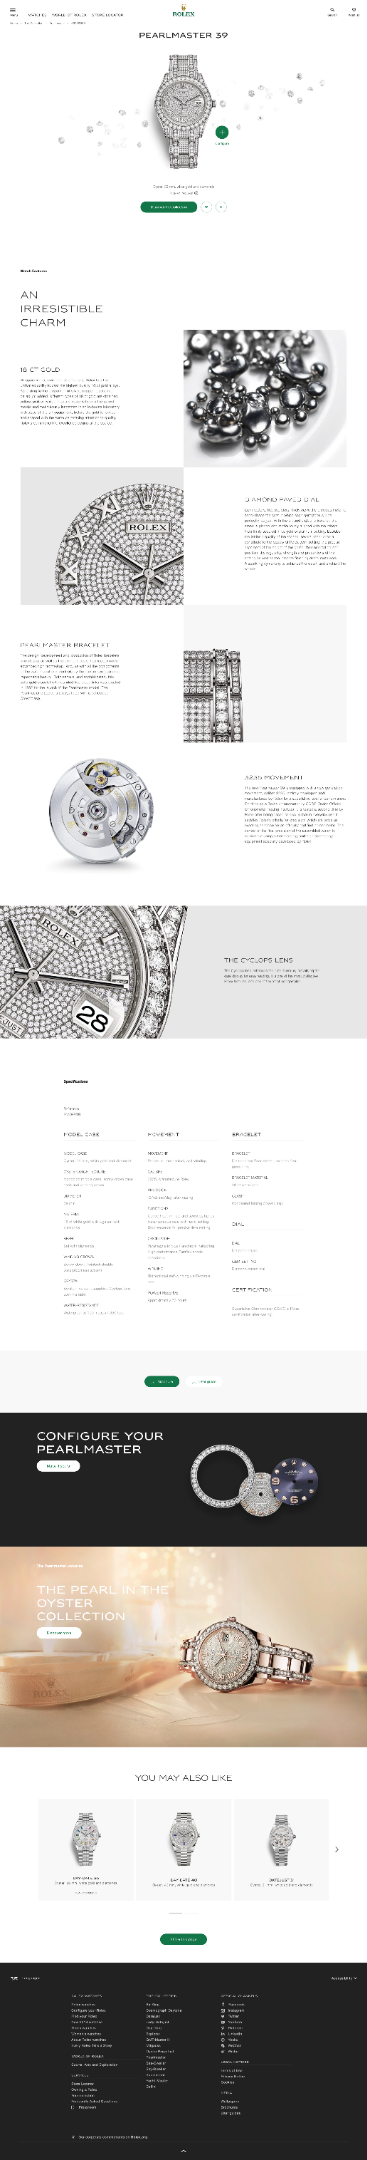 Rolex example of a longer landing page